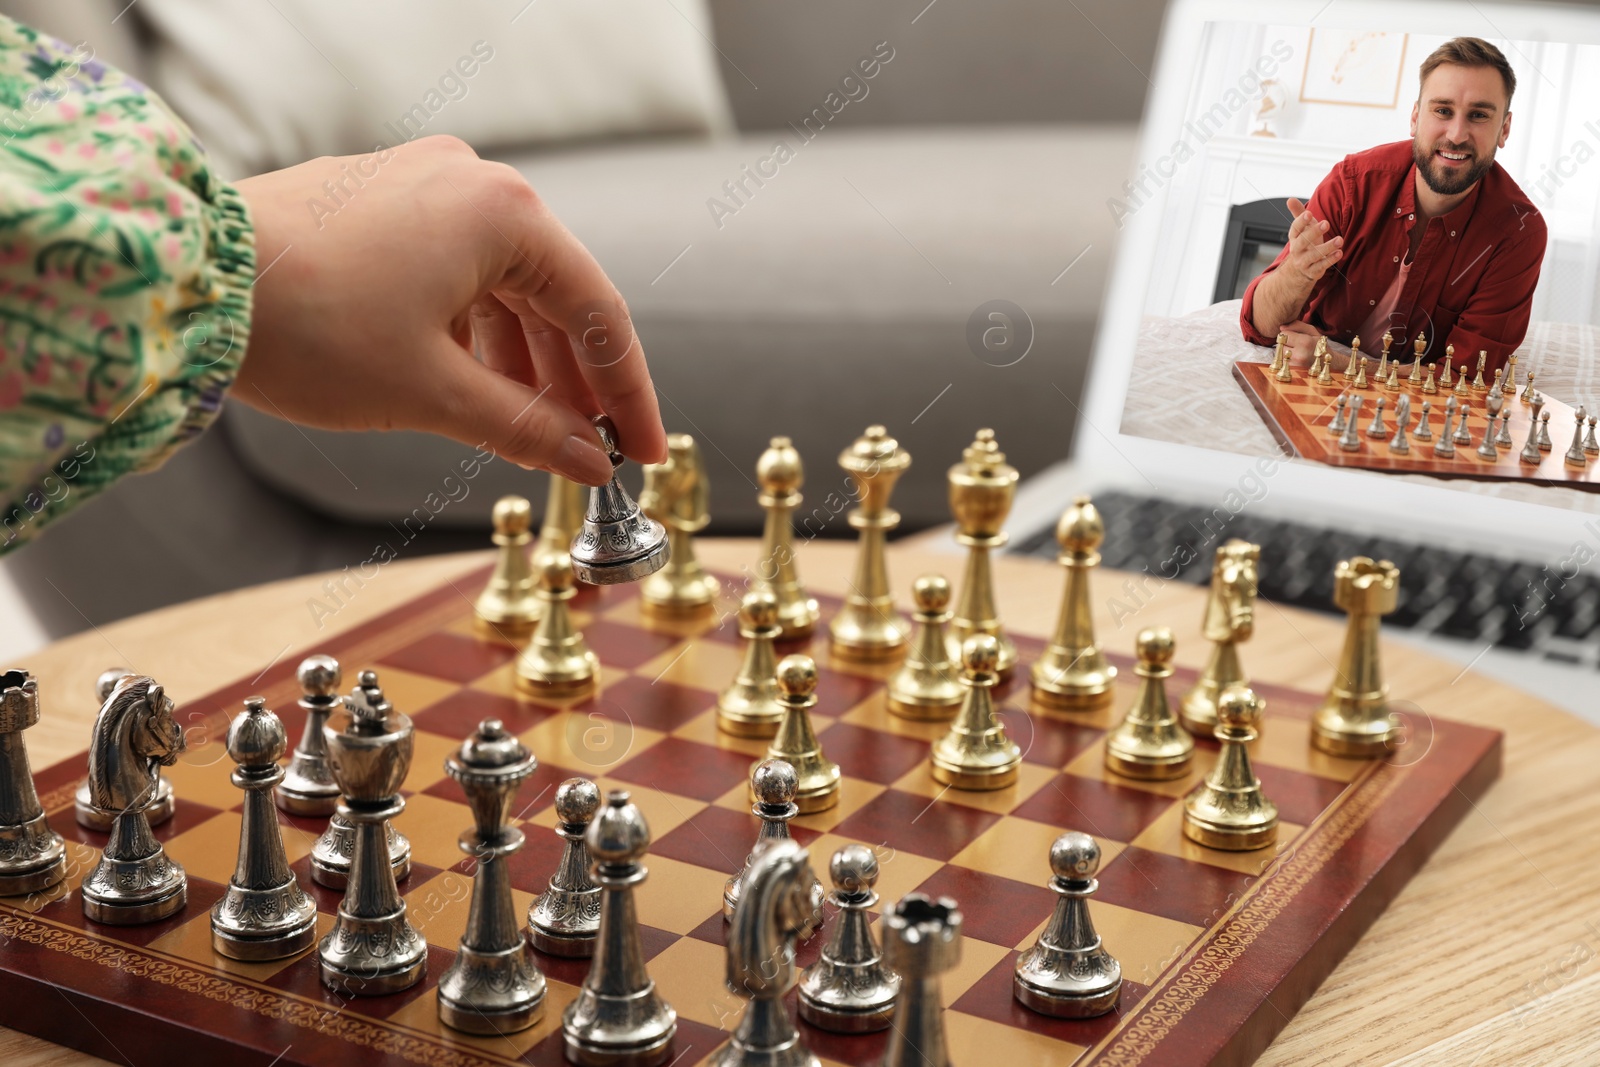 Image of Woman playing chess with partner via online video chat at home, closeup